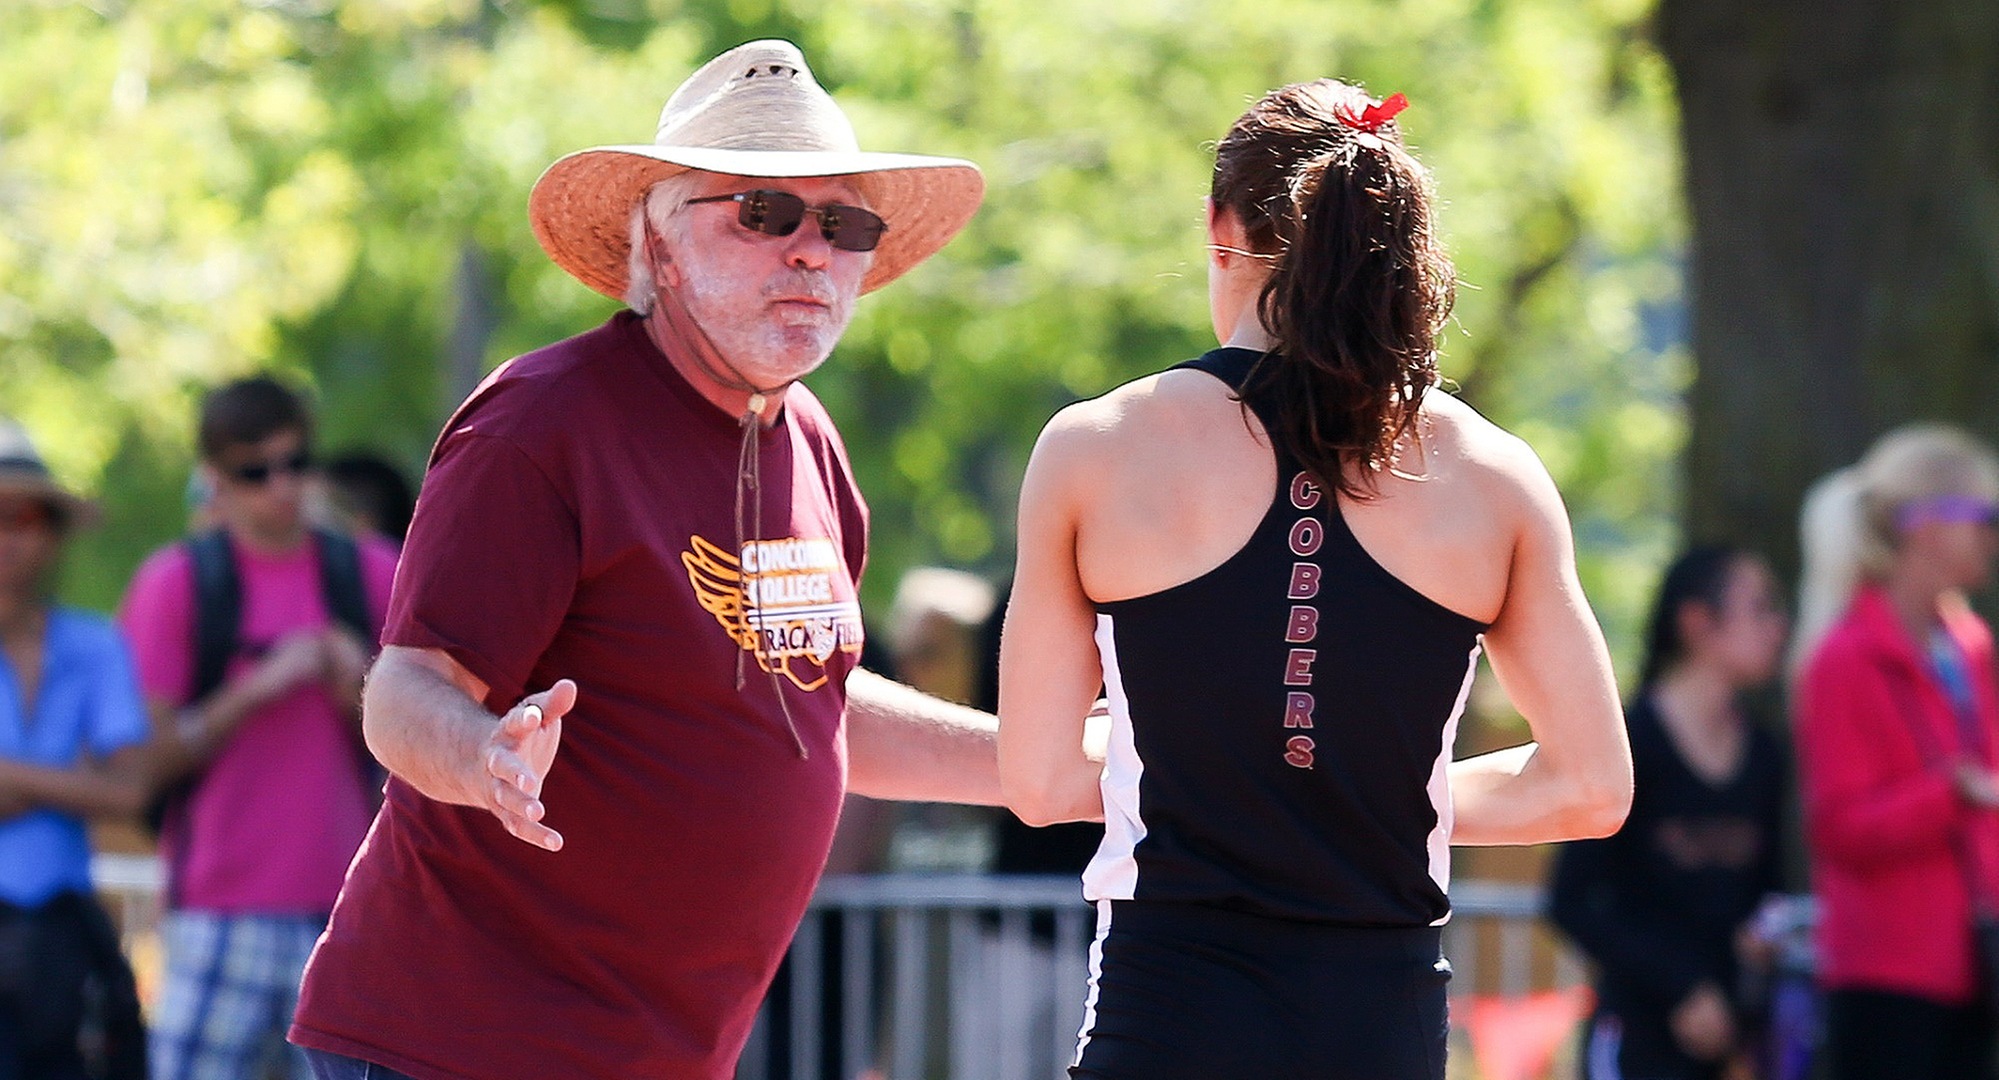 Cobber assistant coach Martin Peper (L) and Emma Peterson both earned USTFCCCA top regional honors. (Photo courtesy of Nathan Lodermeier)